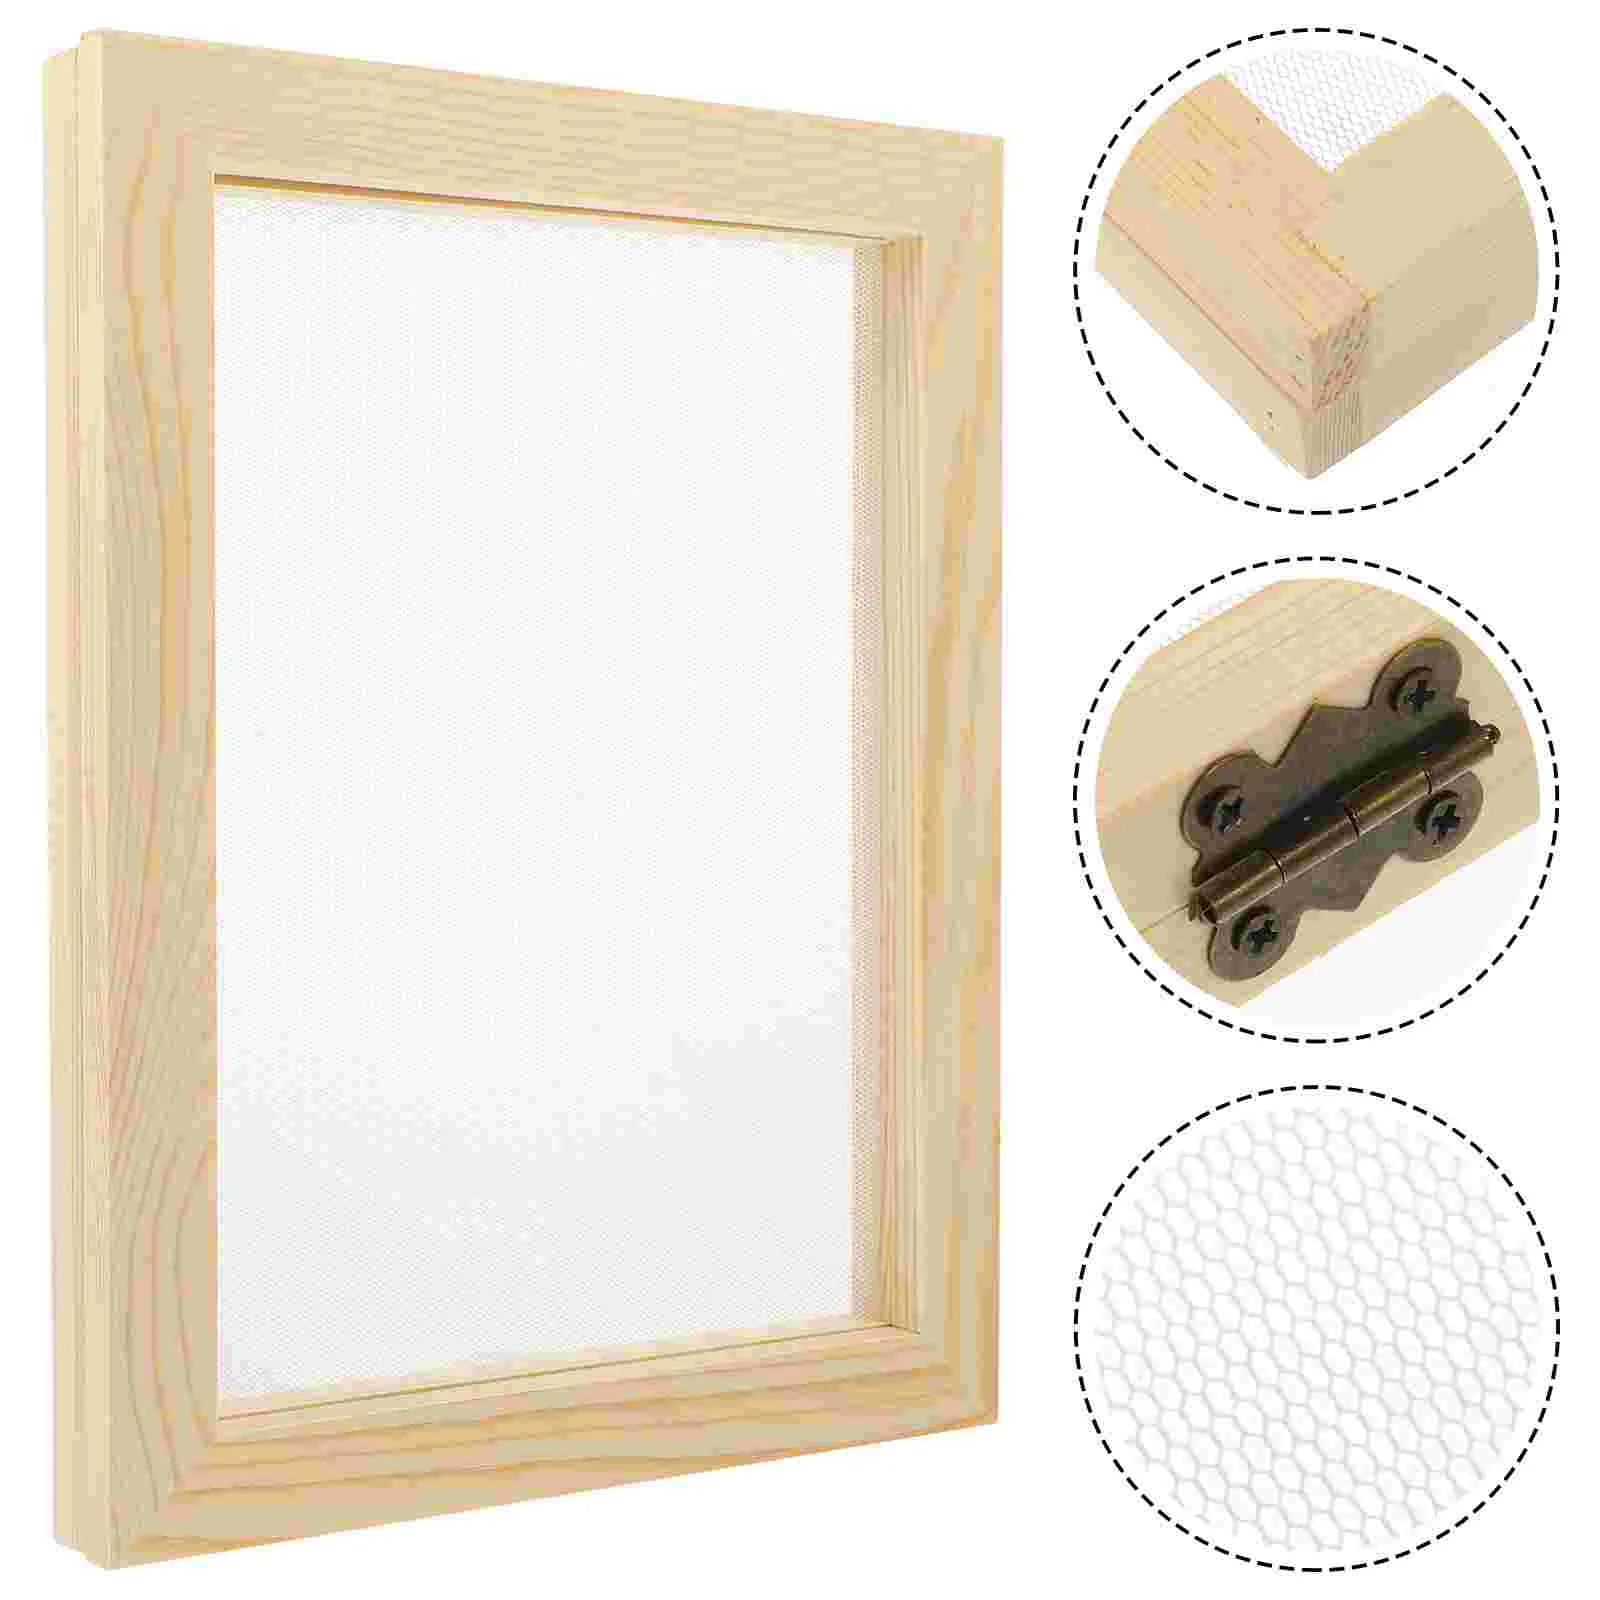 

Paper Making Frame Screen Diy Wooden Mould Papermaking Craft Deckle Printing Toys Handmade Kit Kids Mold Tools Package Flower